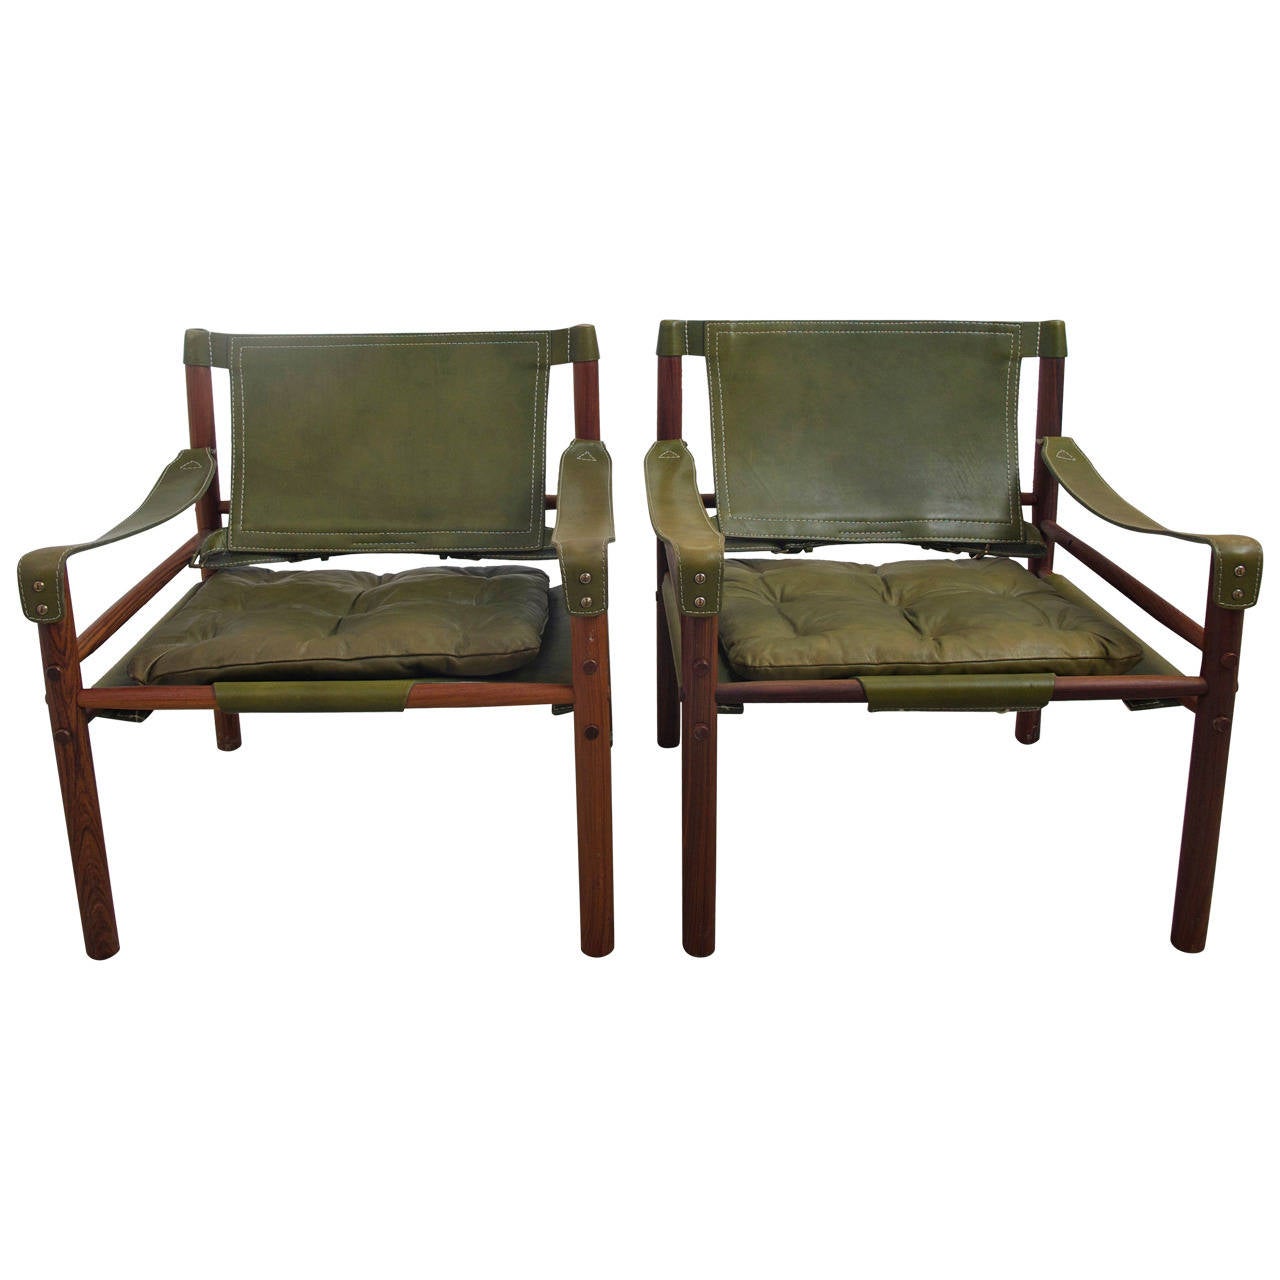 Arne Norell Rosewood and Leather "Sirocco" Safari Chairs